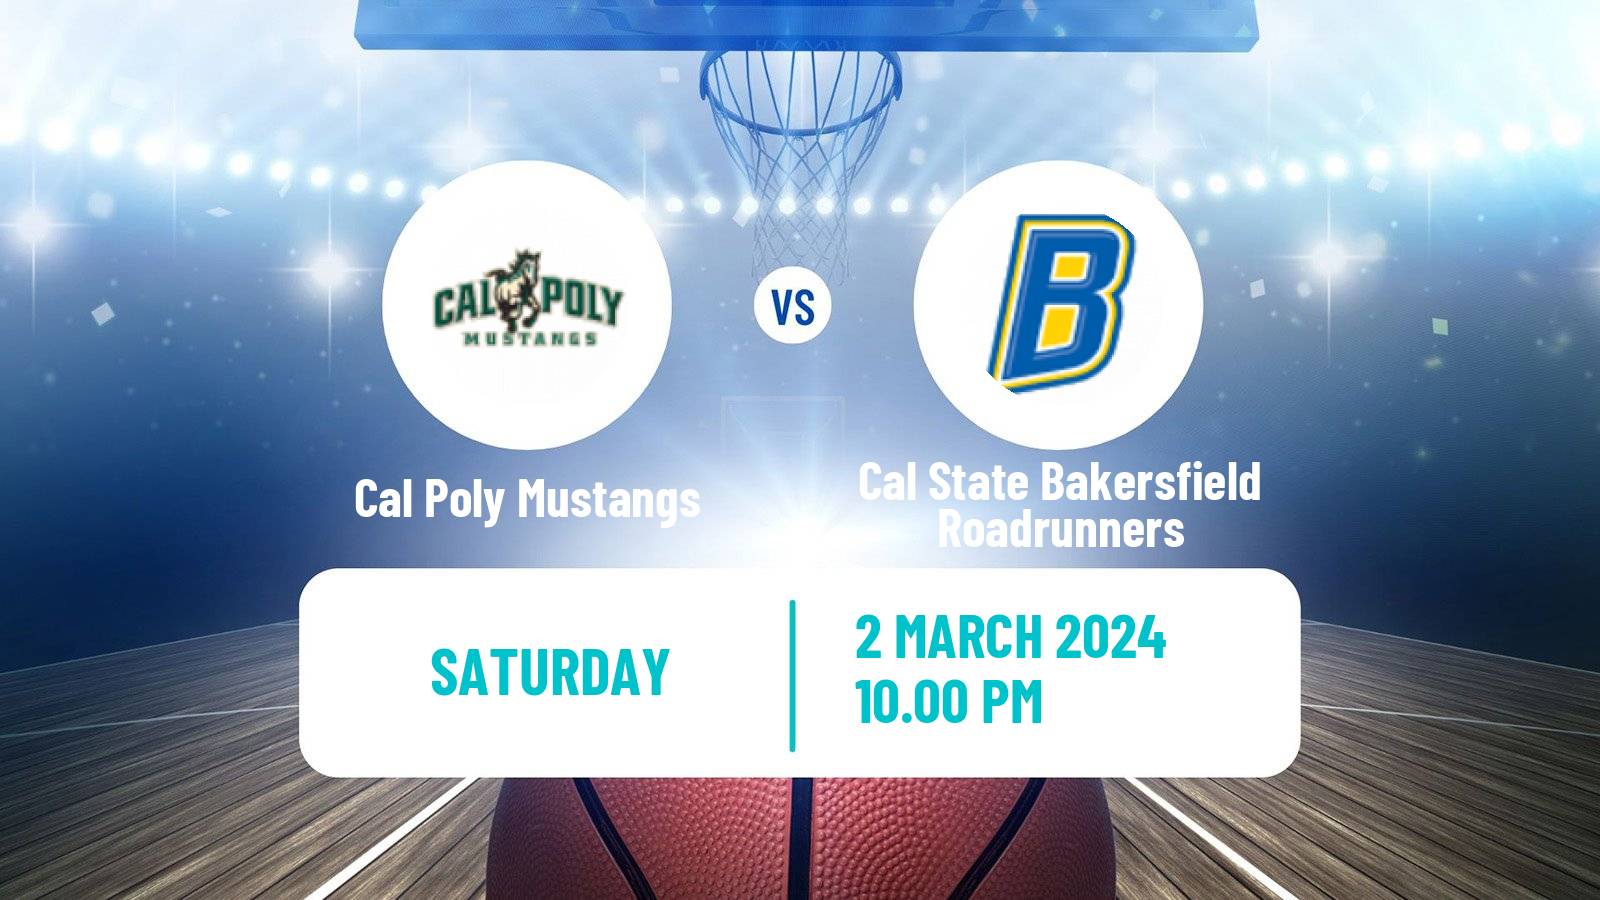 Basketball NCAA College Basketball Cal Poly Mustangs - Cal State Bakersfield Roadrunners